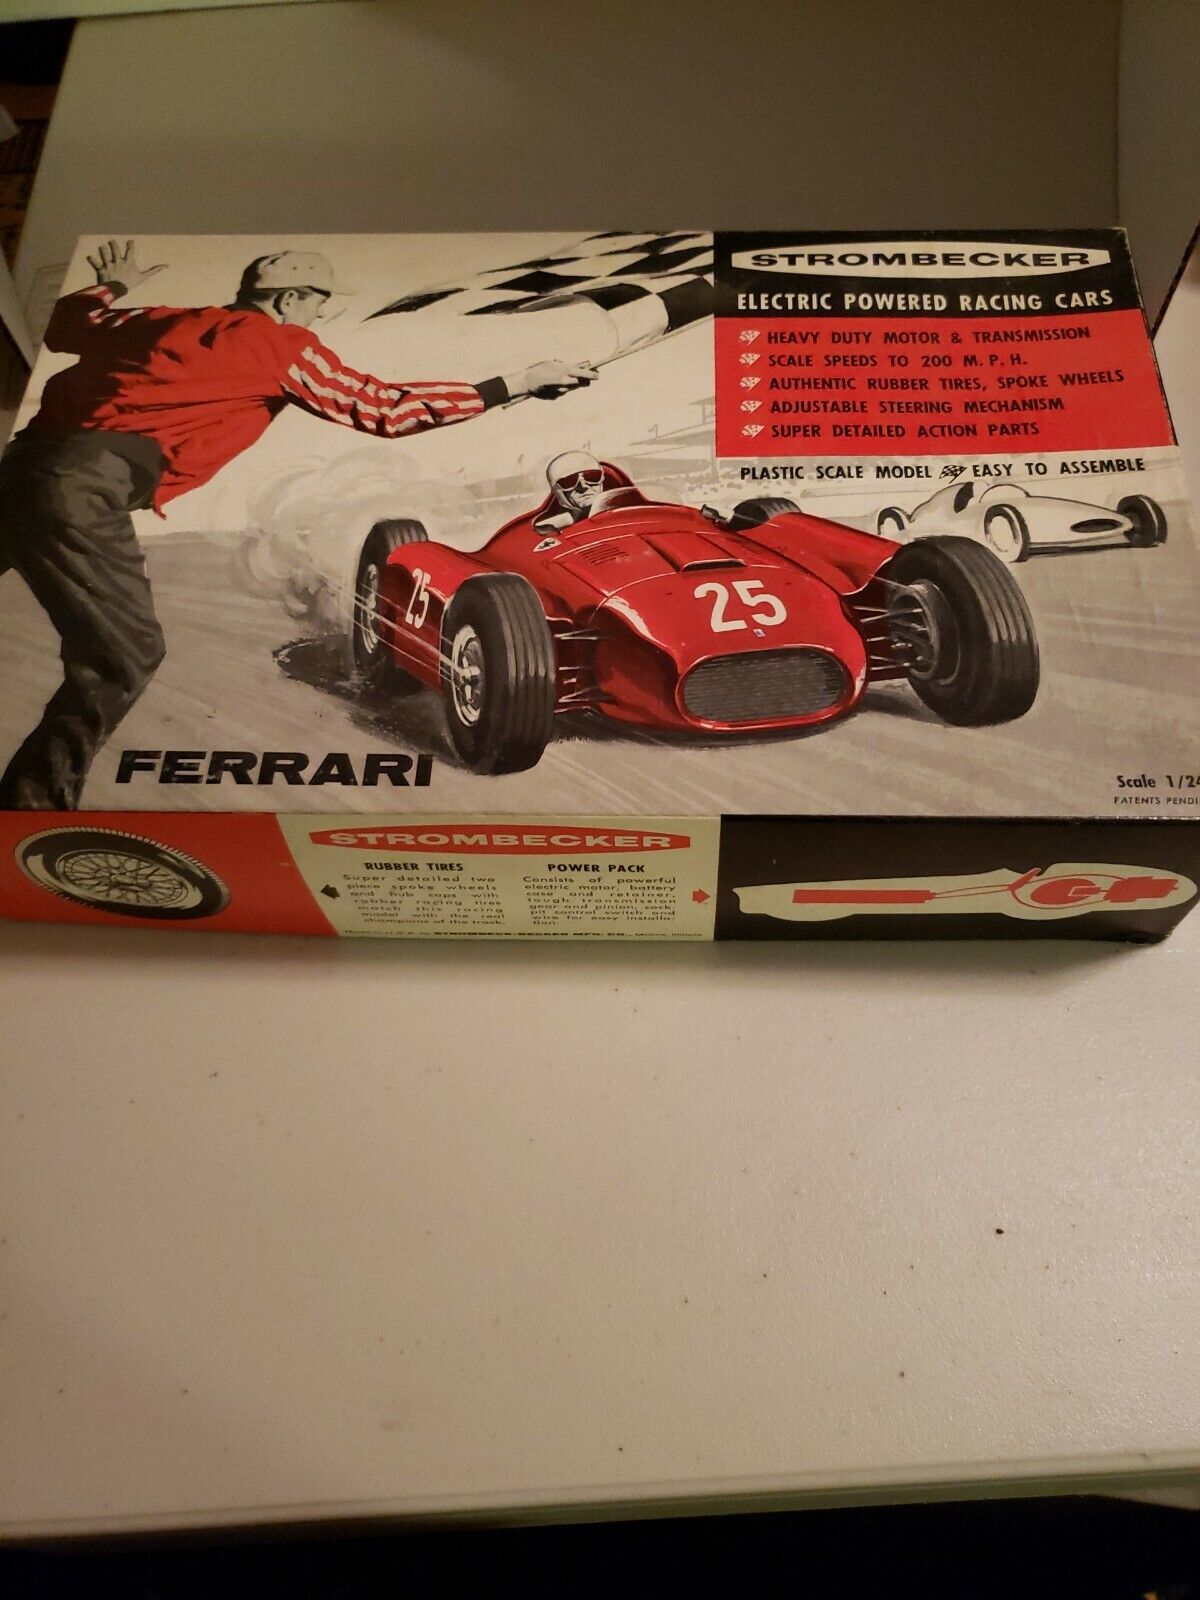 Strombecker BOX ONLY Ferrari Electric Max 43% OFF New item Car Racing Powered Vintage